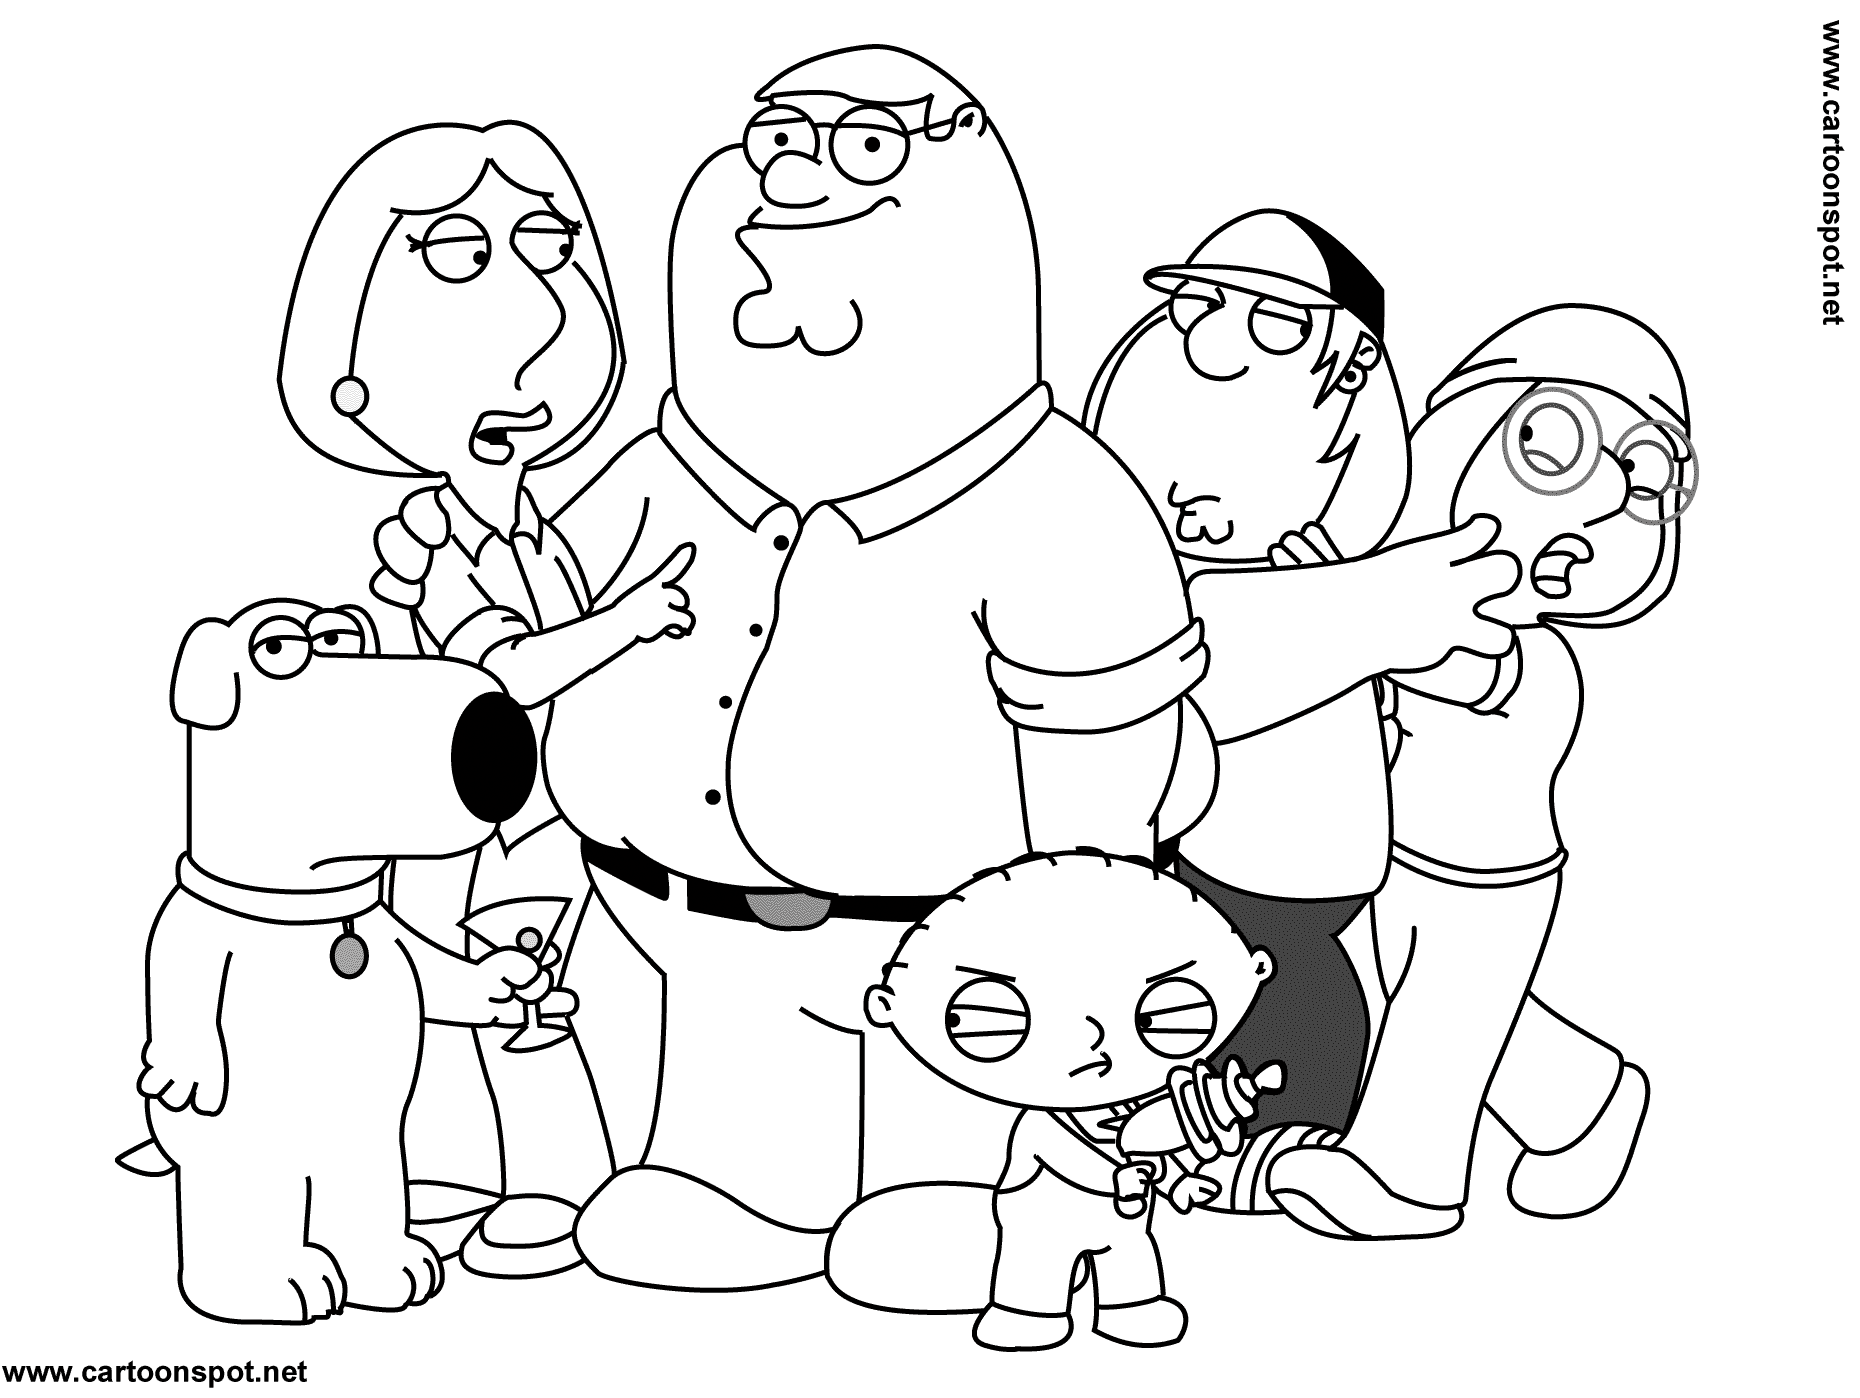 Chris From Family Guy Coloring Page - Coloring Home